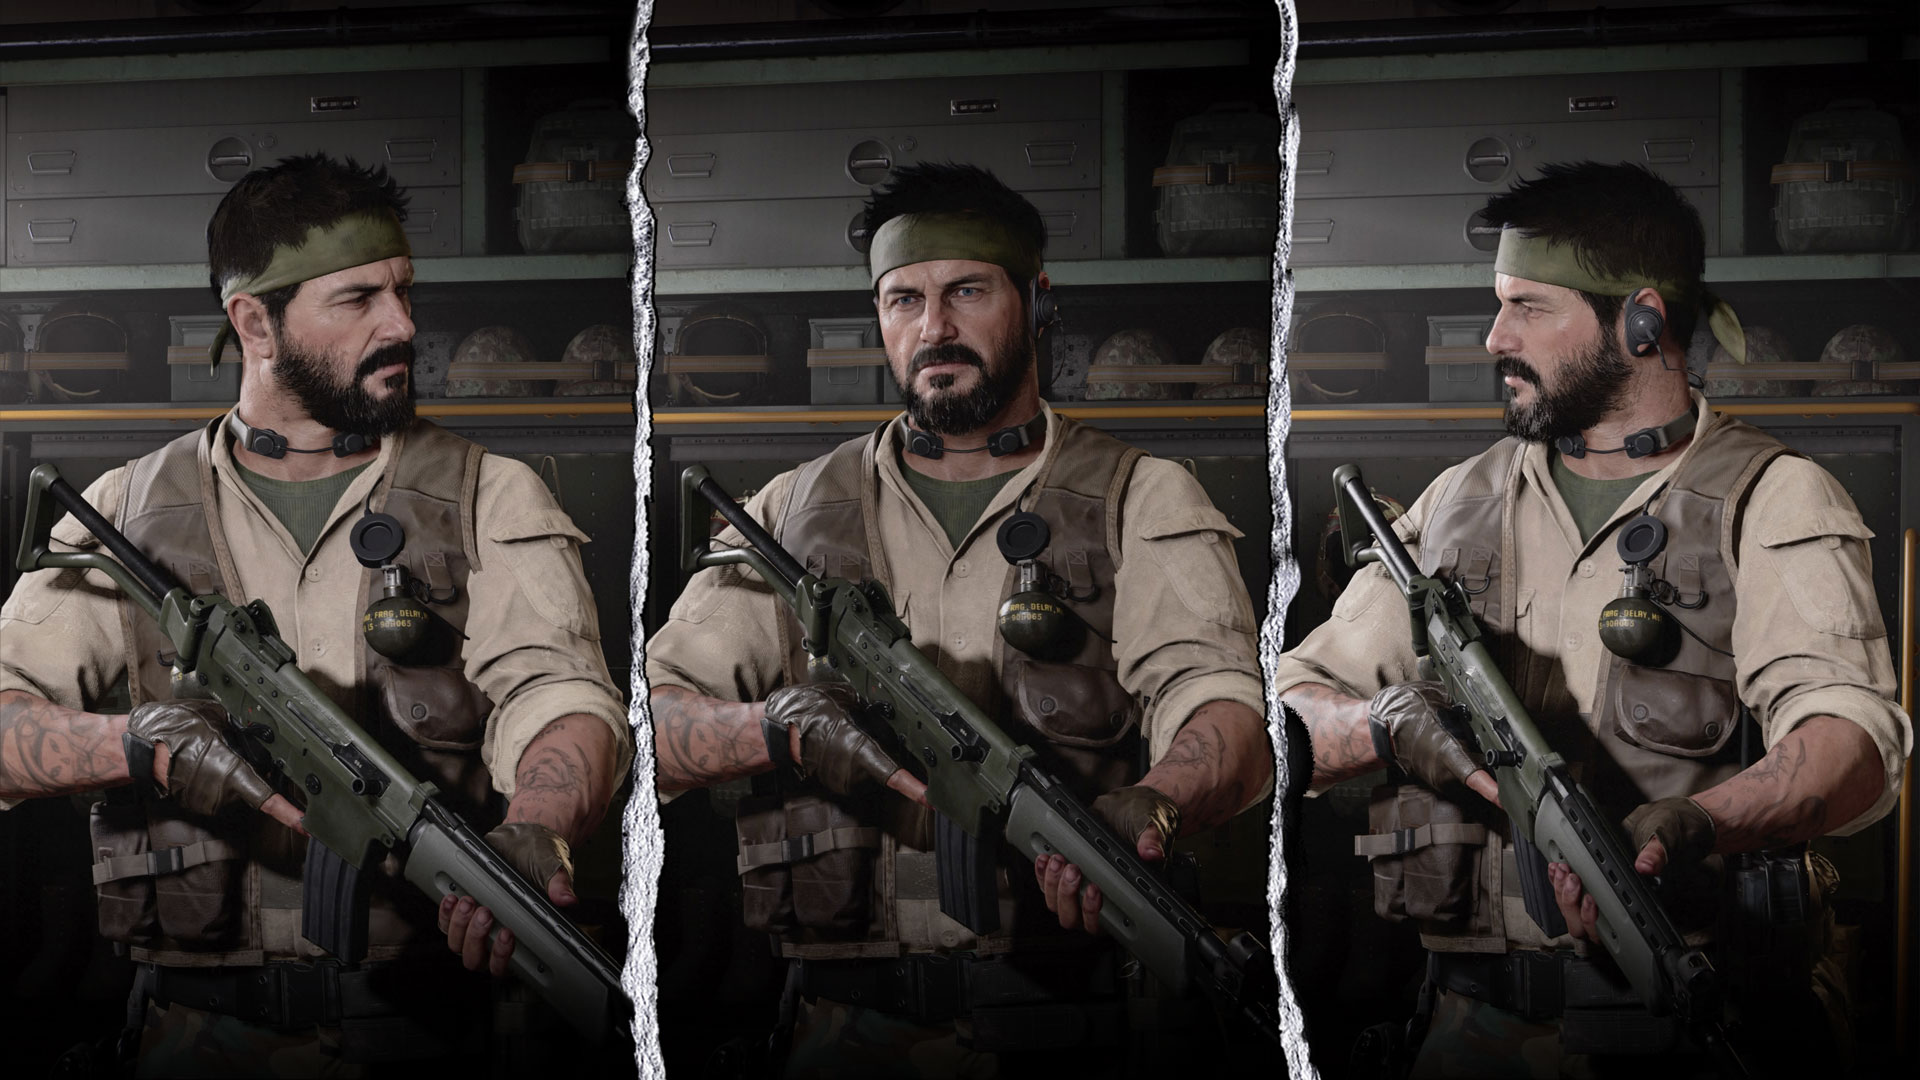 New Character In 'Call Of Duty: Modern Warfare' Is Real-Life Green Beret